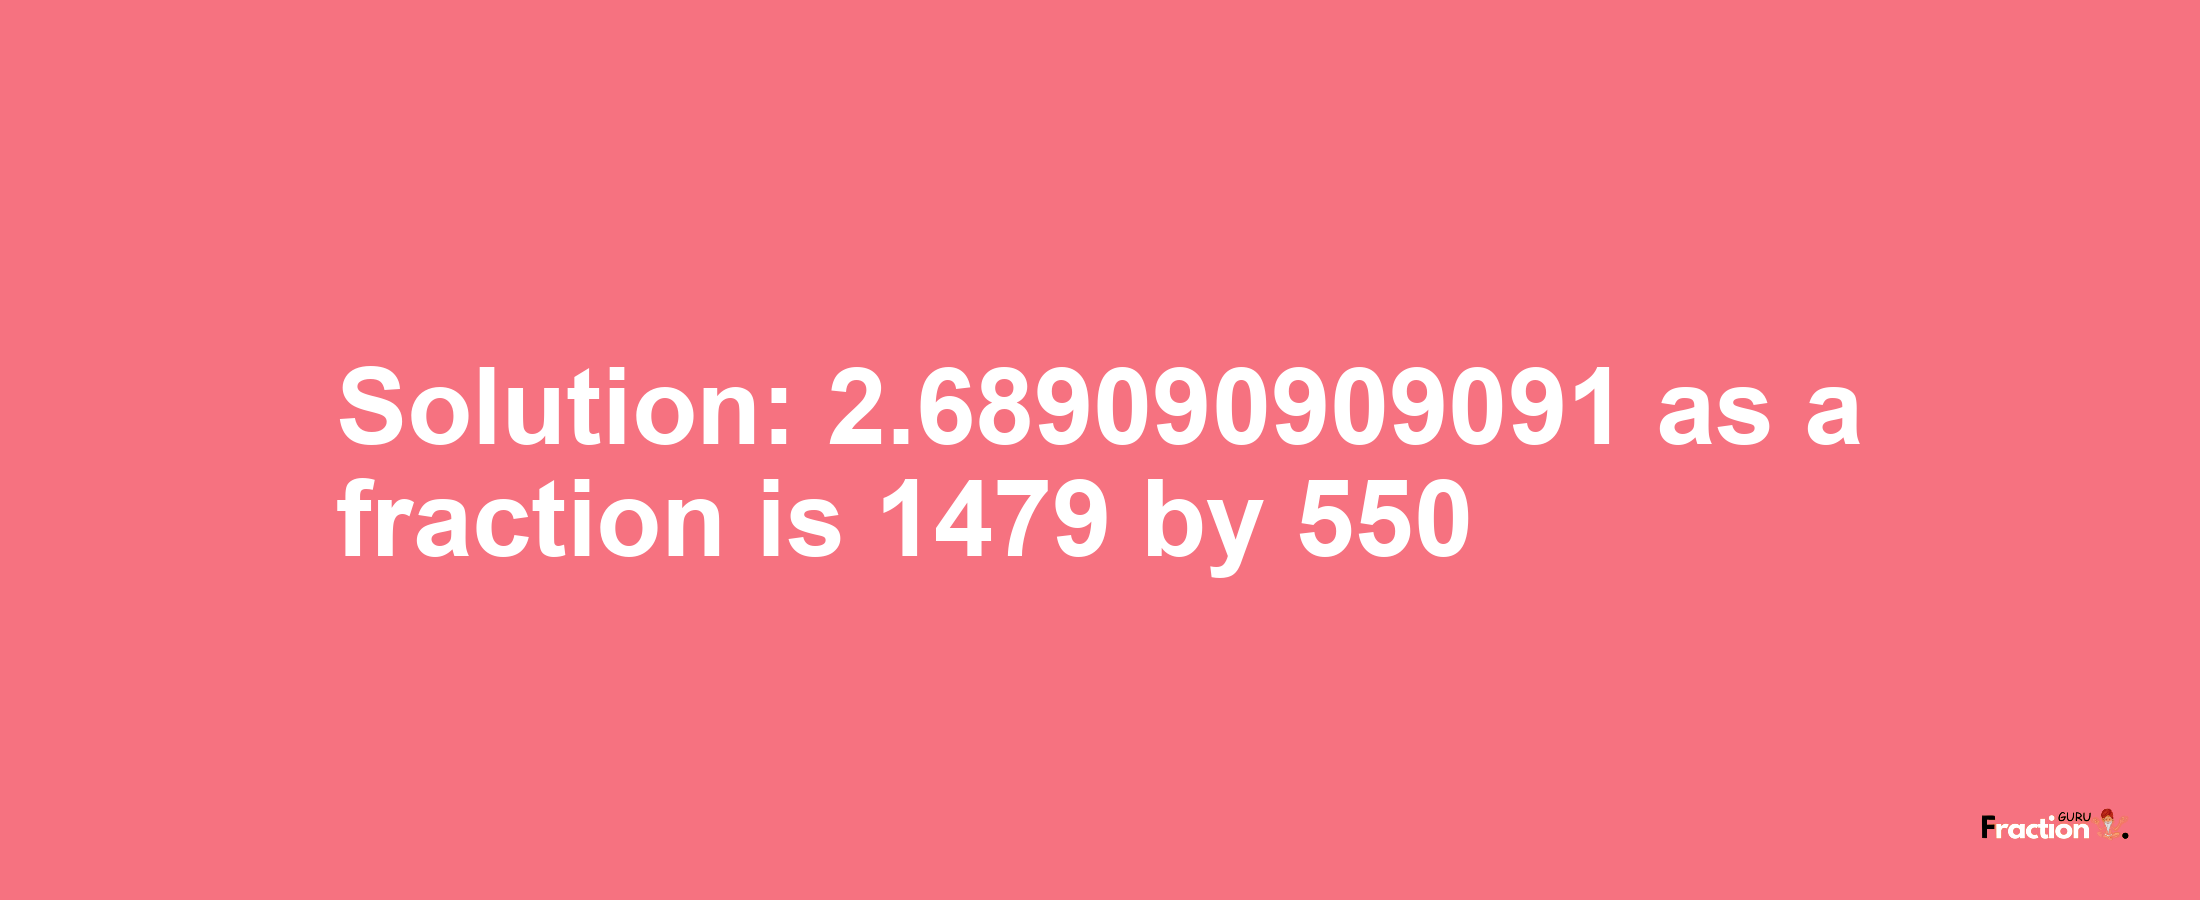 Solution:2.689090909091 as a fraction is 1479/550